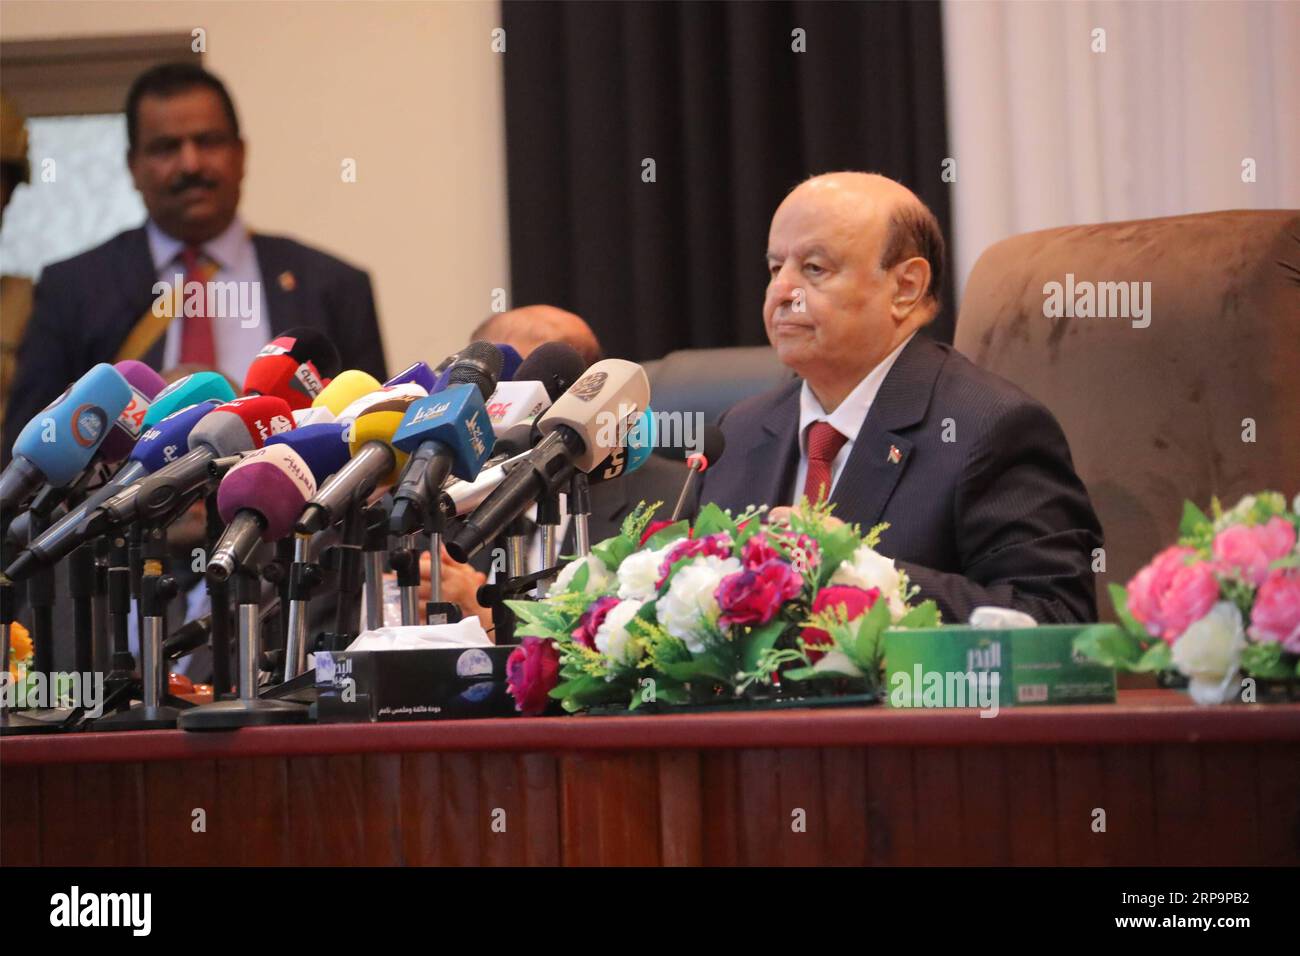 (190413) -- SEIYUN (YEMEN), April 13, 2019 -- Yemeni President Abdu-Rabbu Mansour Hadi (L) delivers the opening speech during the parliamentary session in Seiyun city of Hadramout province, Yemen, on April 13, 2019. Yemen s parliament convened on Saturday in the city of Seiyun, the second largest city in the southeastern province of Hadramout, for the first time since the outbreak of the devastating civil war in the impoverished Arab country in March 2015. ) YEMEN-SEIYUN-PARLIAMENT MEETING IsmailxRabidhy PUBLICATIONxNOTxINxCHN Stock Photo